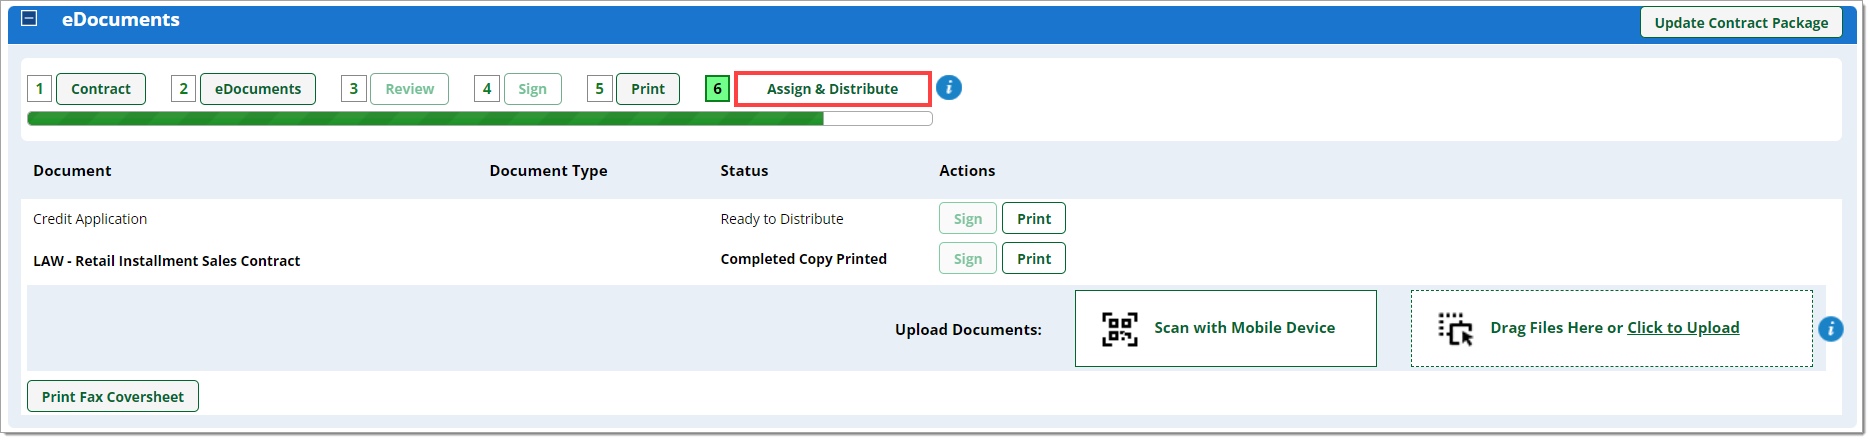 The eDocuments section of the Contract Package page with a box highlighting the ‘Assign and Distribute’ button.